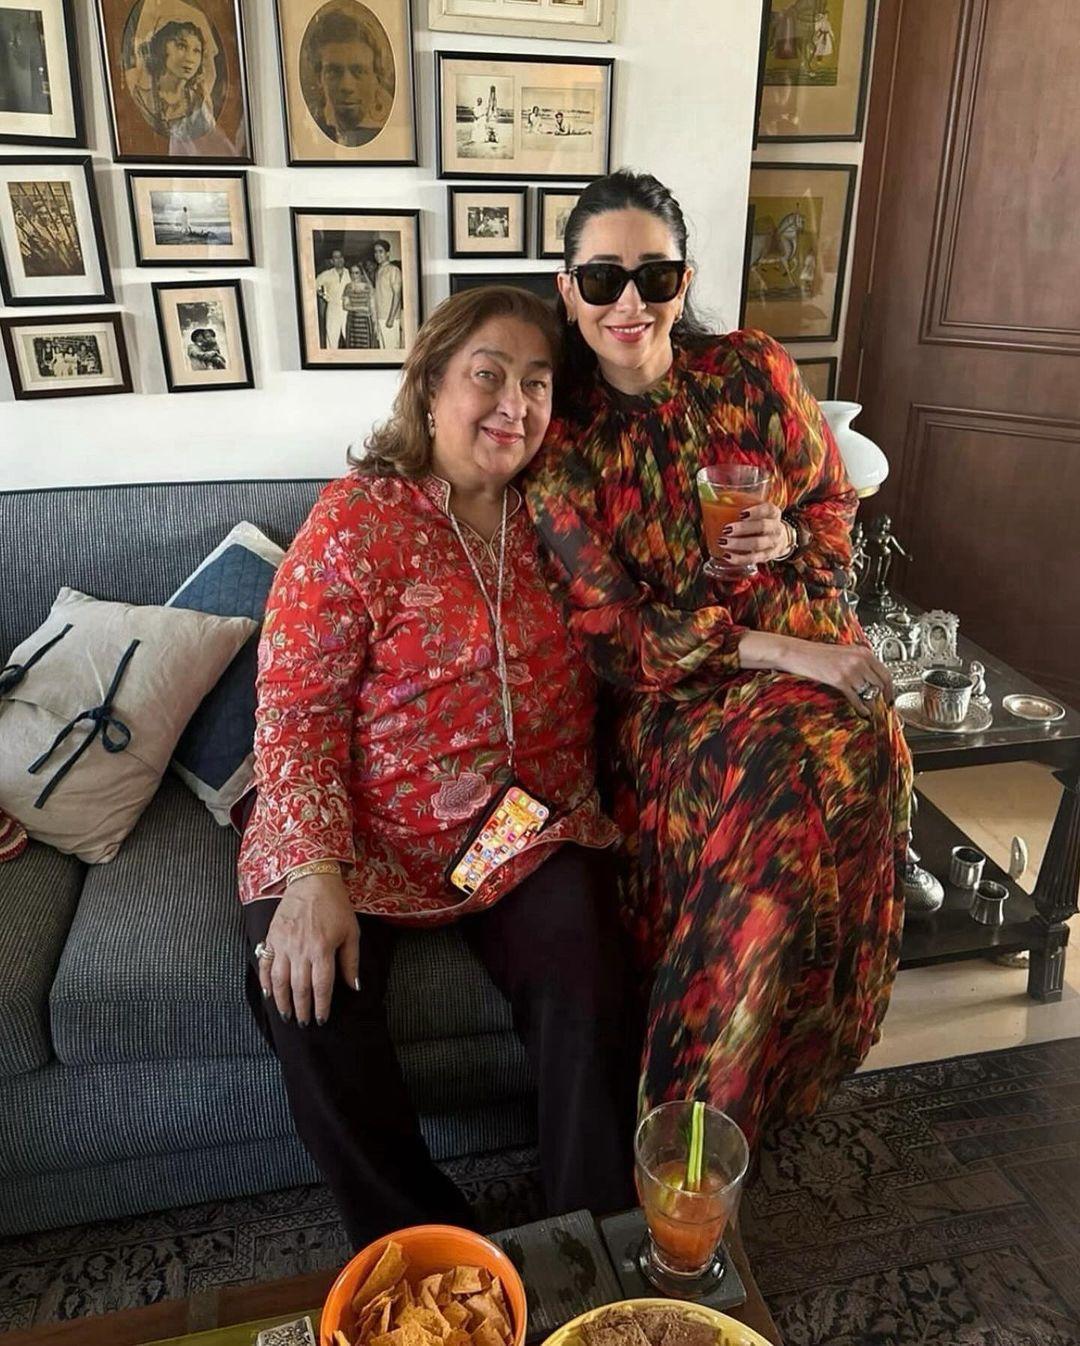 Karisma Kapoor also poses with Babita Kapoor. The pictures have now gone viral on the internet and netizens already cannot have enough of them